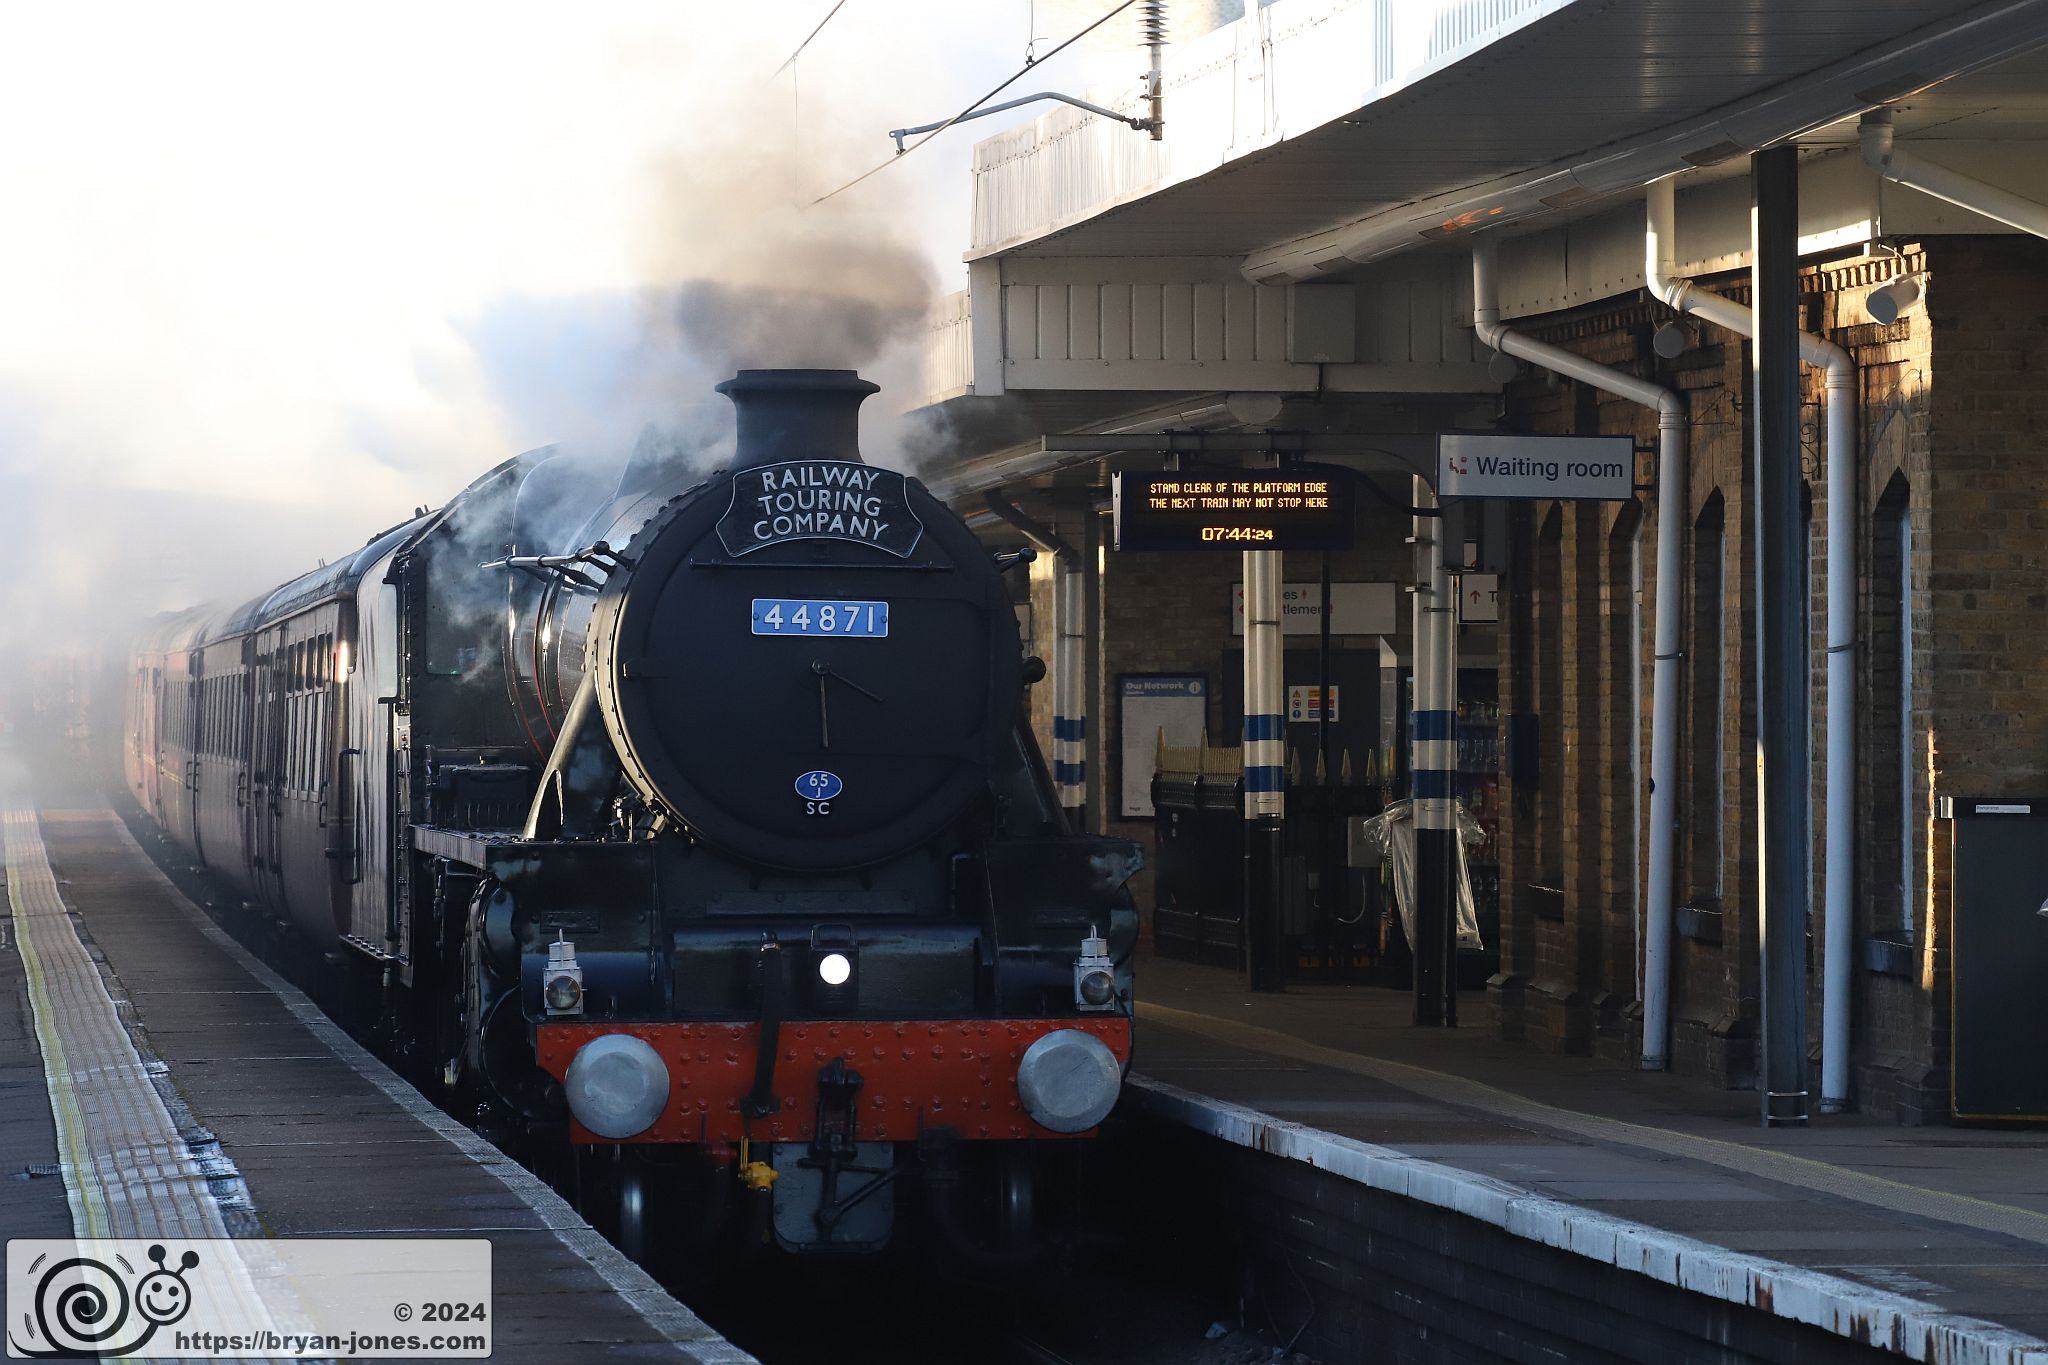 LMS Stanier Class 5 4-6-0 No. 44871 at Finsbury Park station at 07:46 on its way from Kings Cross to York with The Railway Touring Company's "The White Rose".